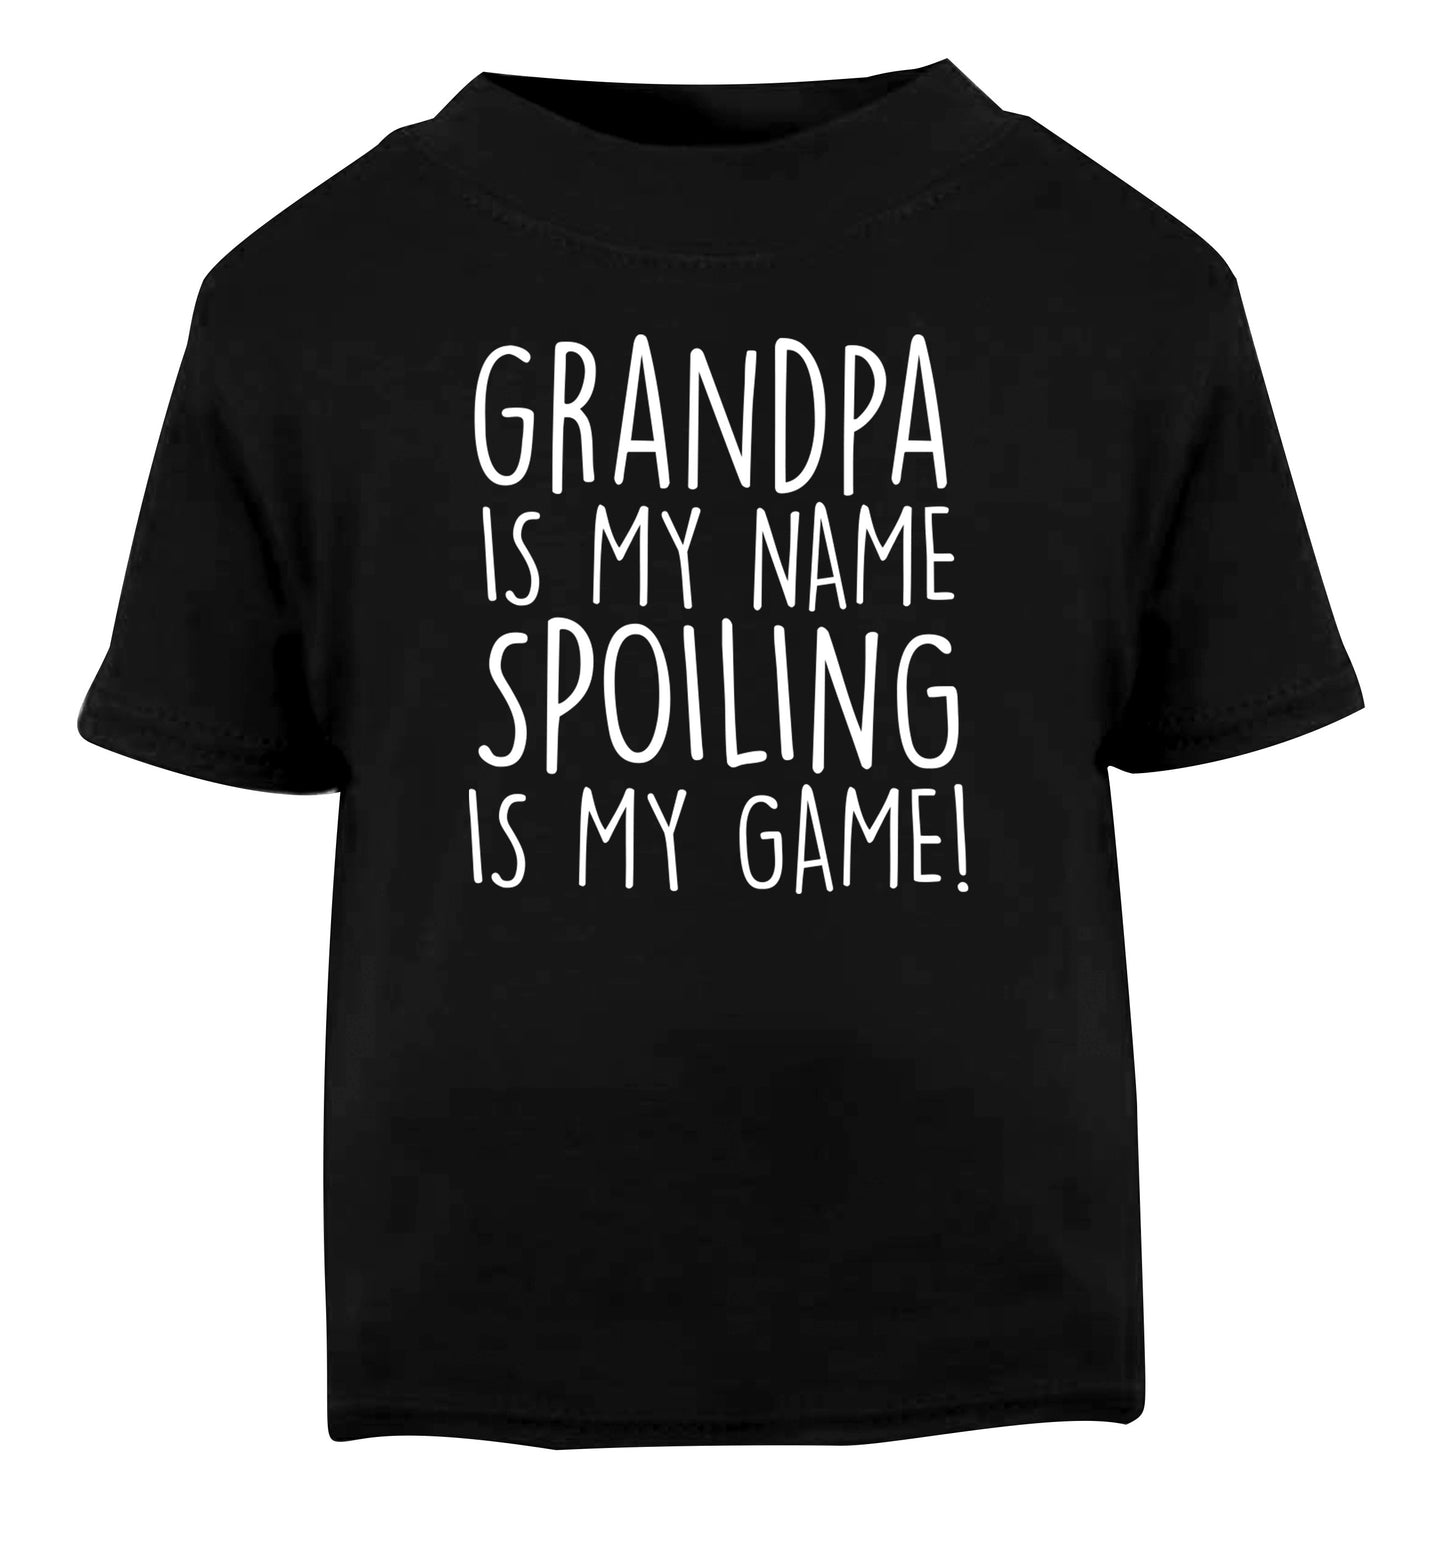 Grandpa is my name, spoiling is my game Black Baby Toddler Tshirt 2 years